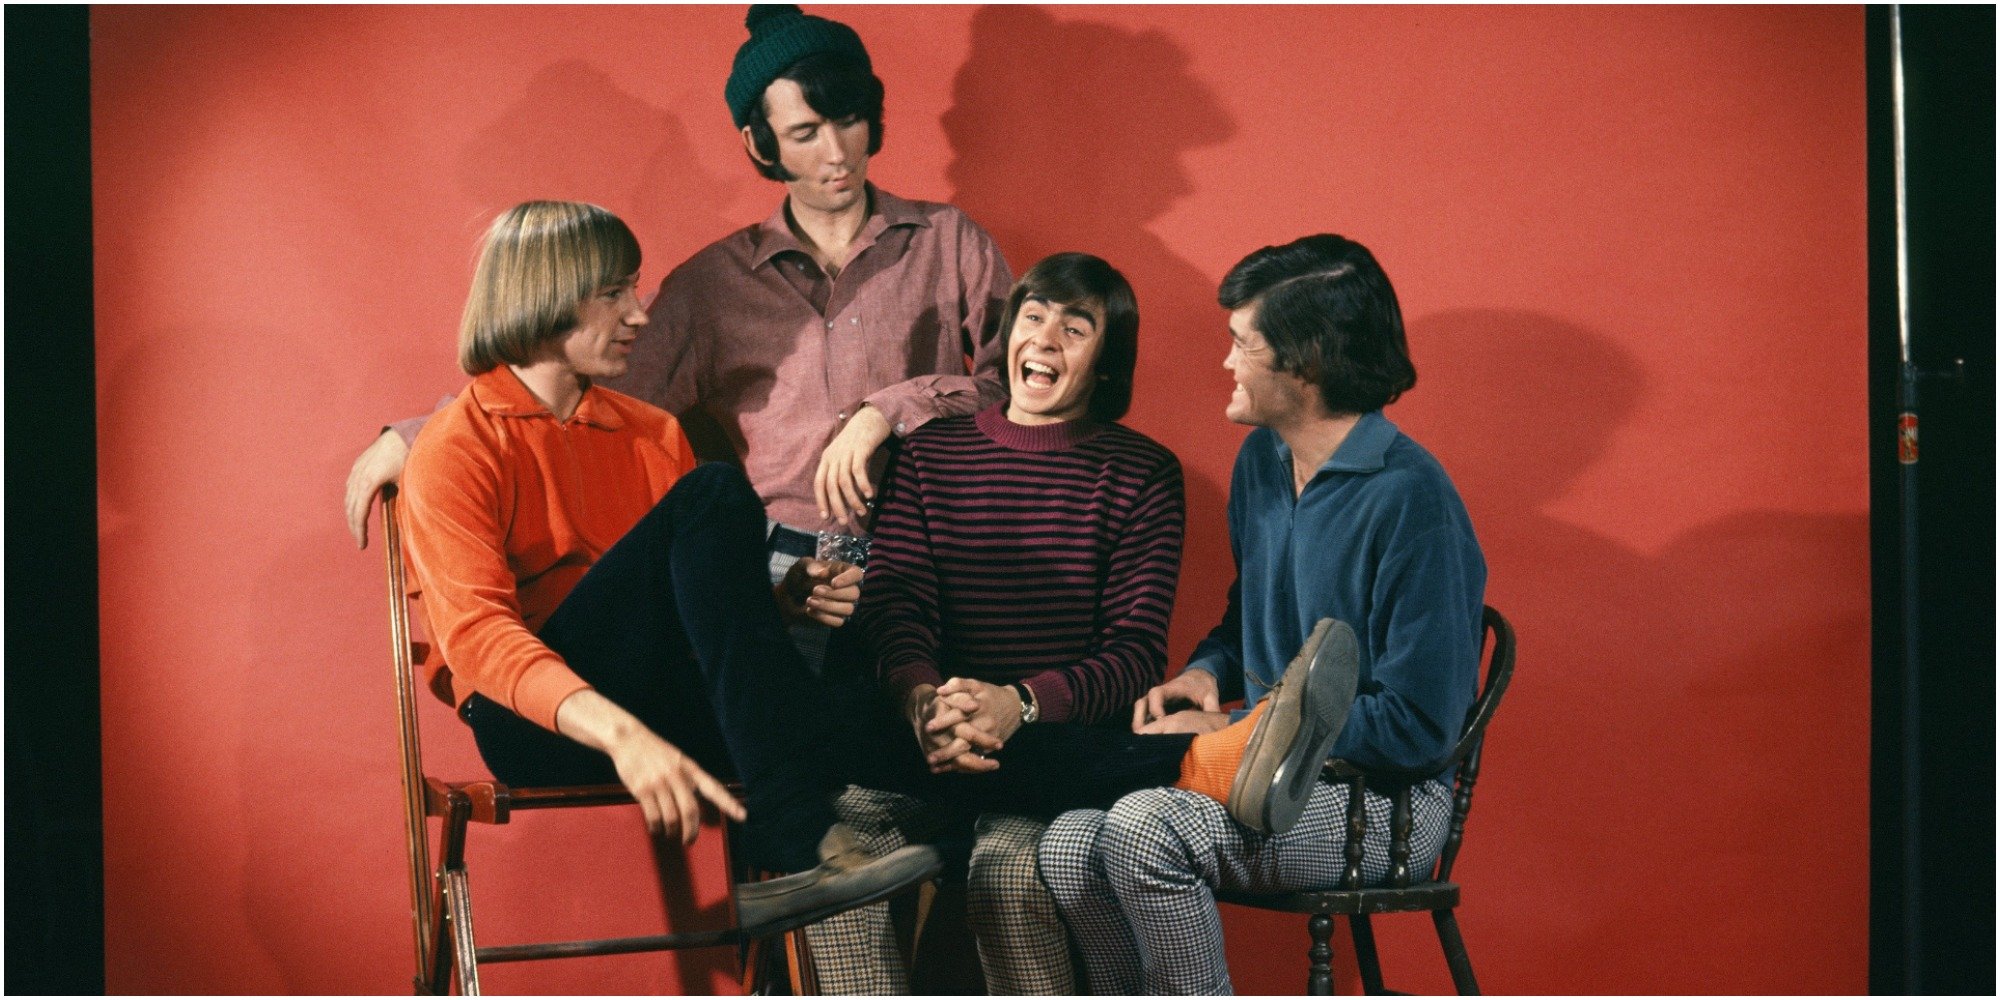 The cast of The Monkees at a photoshoot.